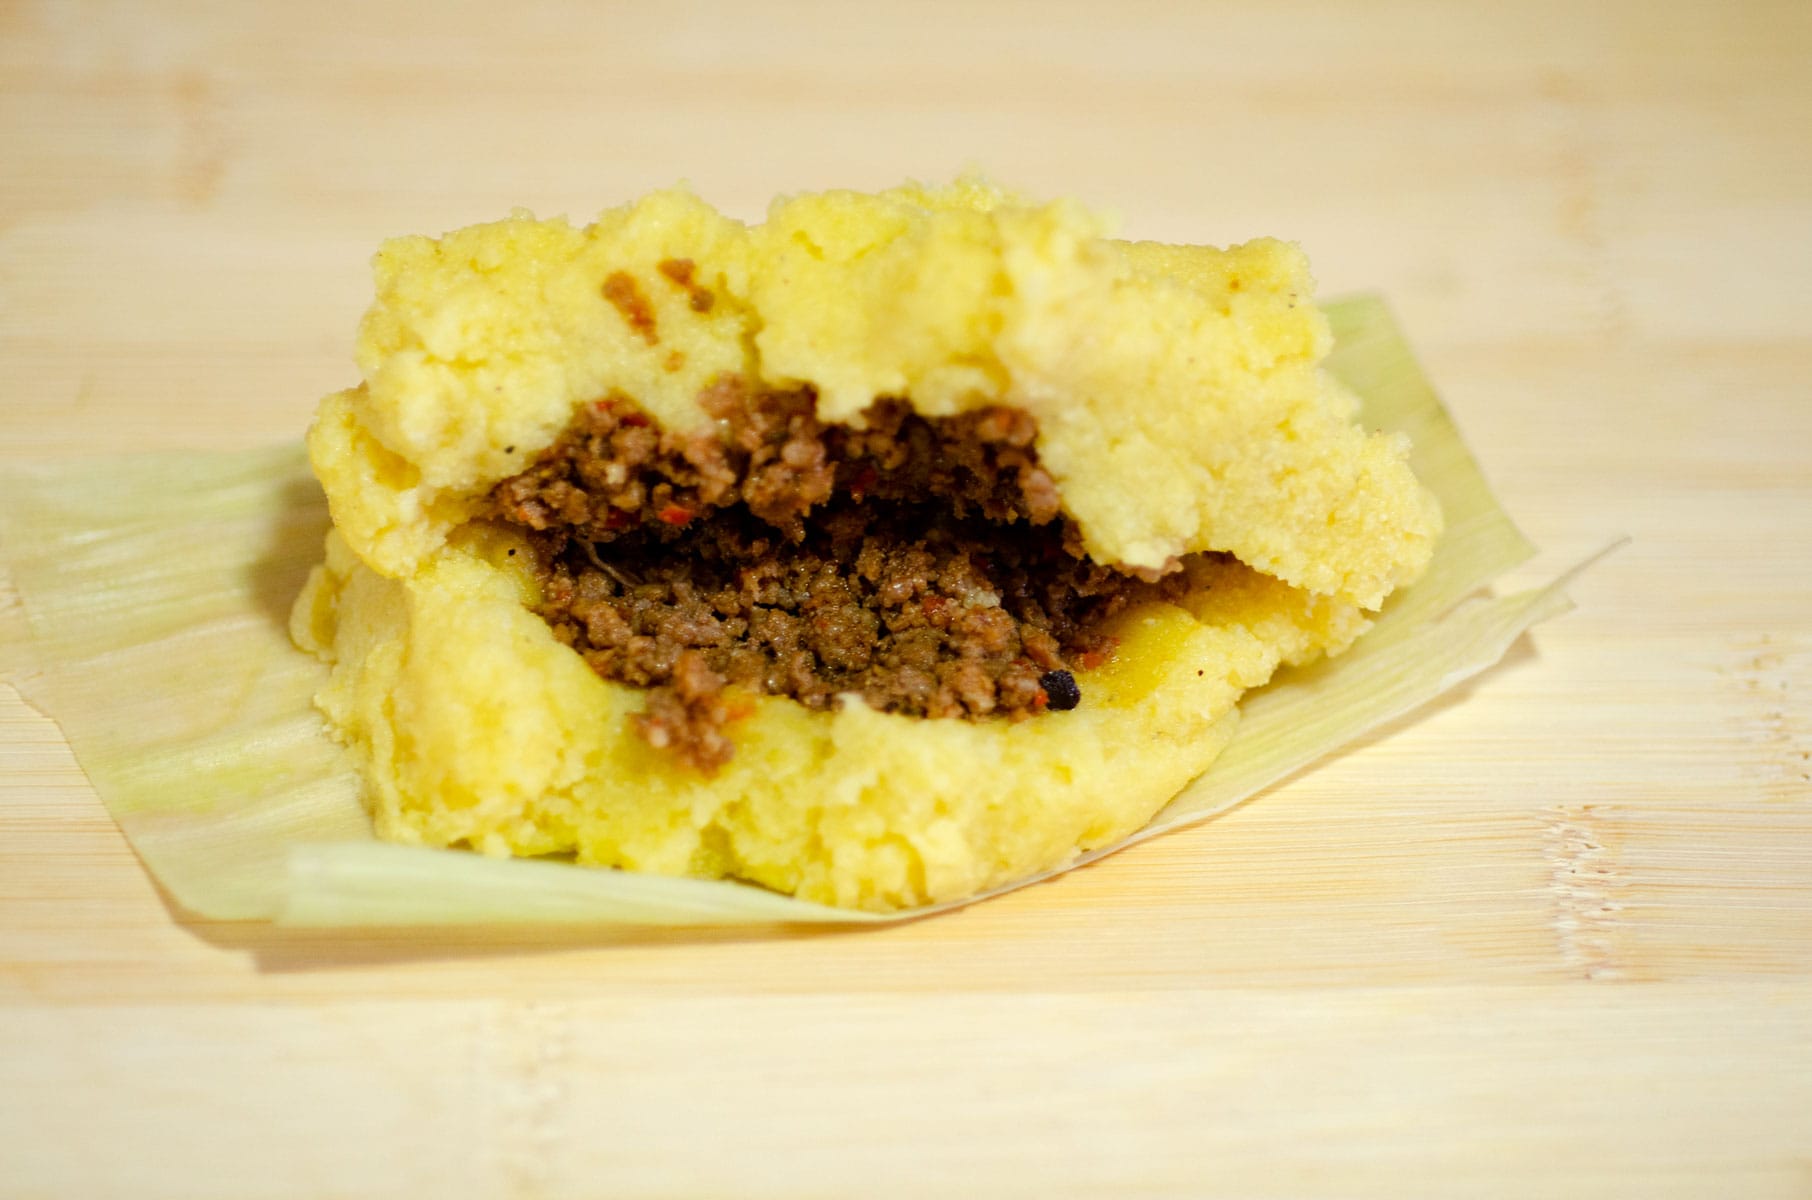 Meat between two layers of cornmeal paste, on a corn husk leaf